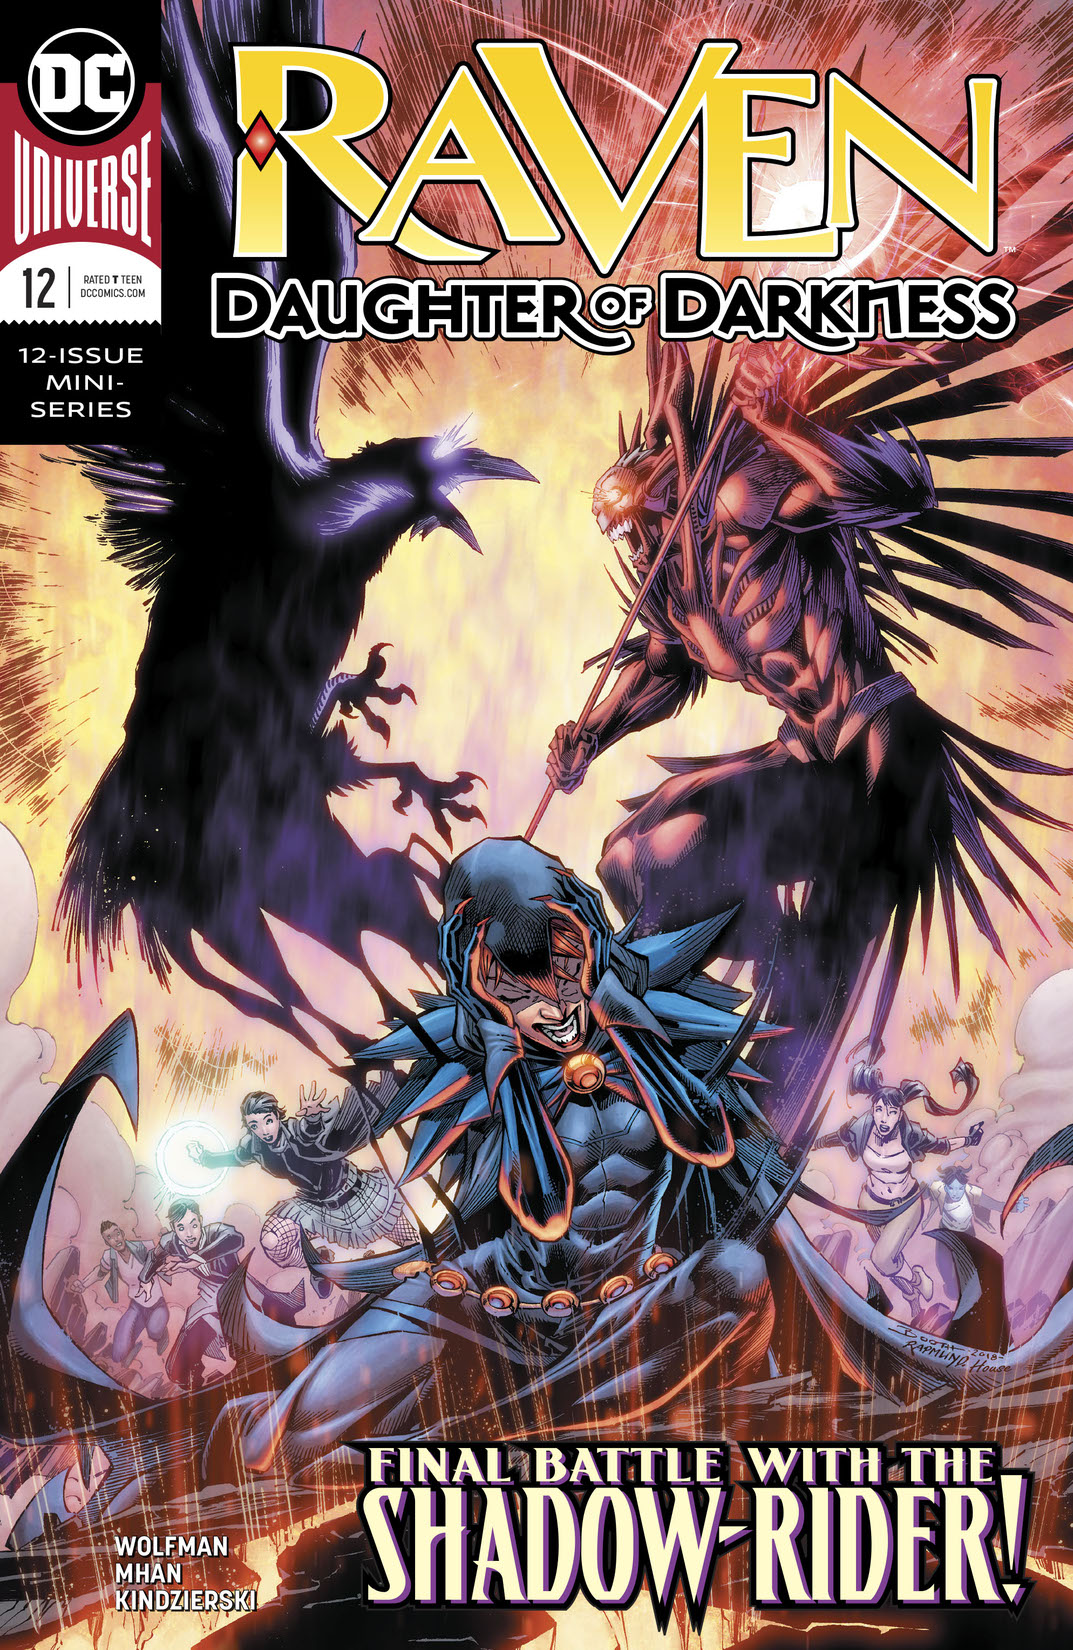 Raven: Daughter of Darkness #12 preview images